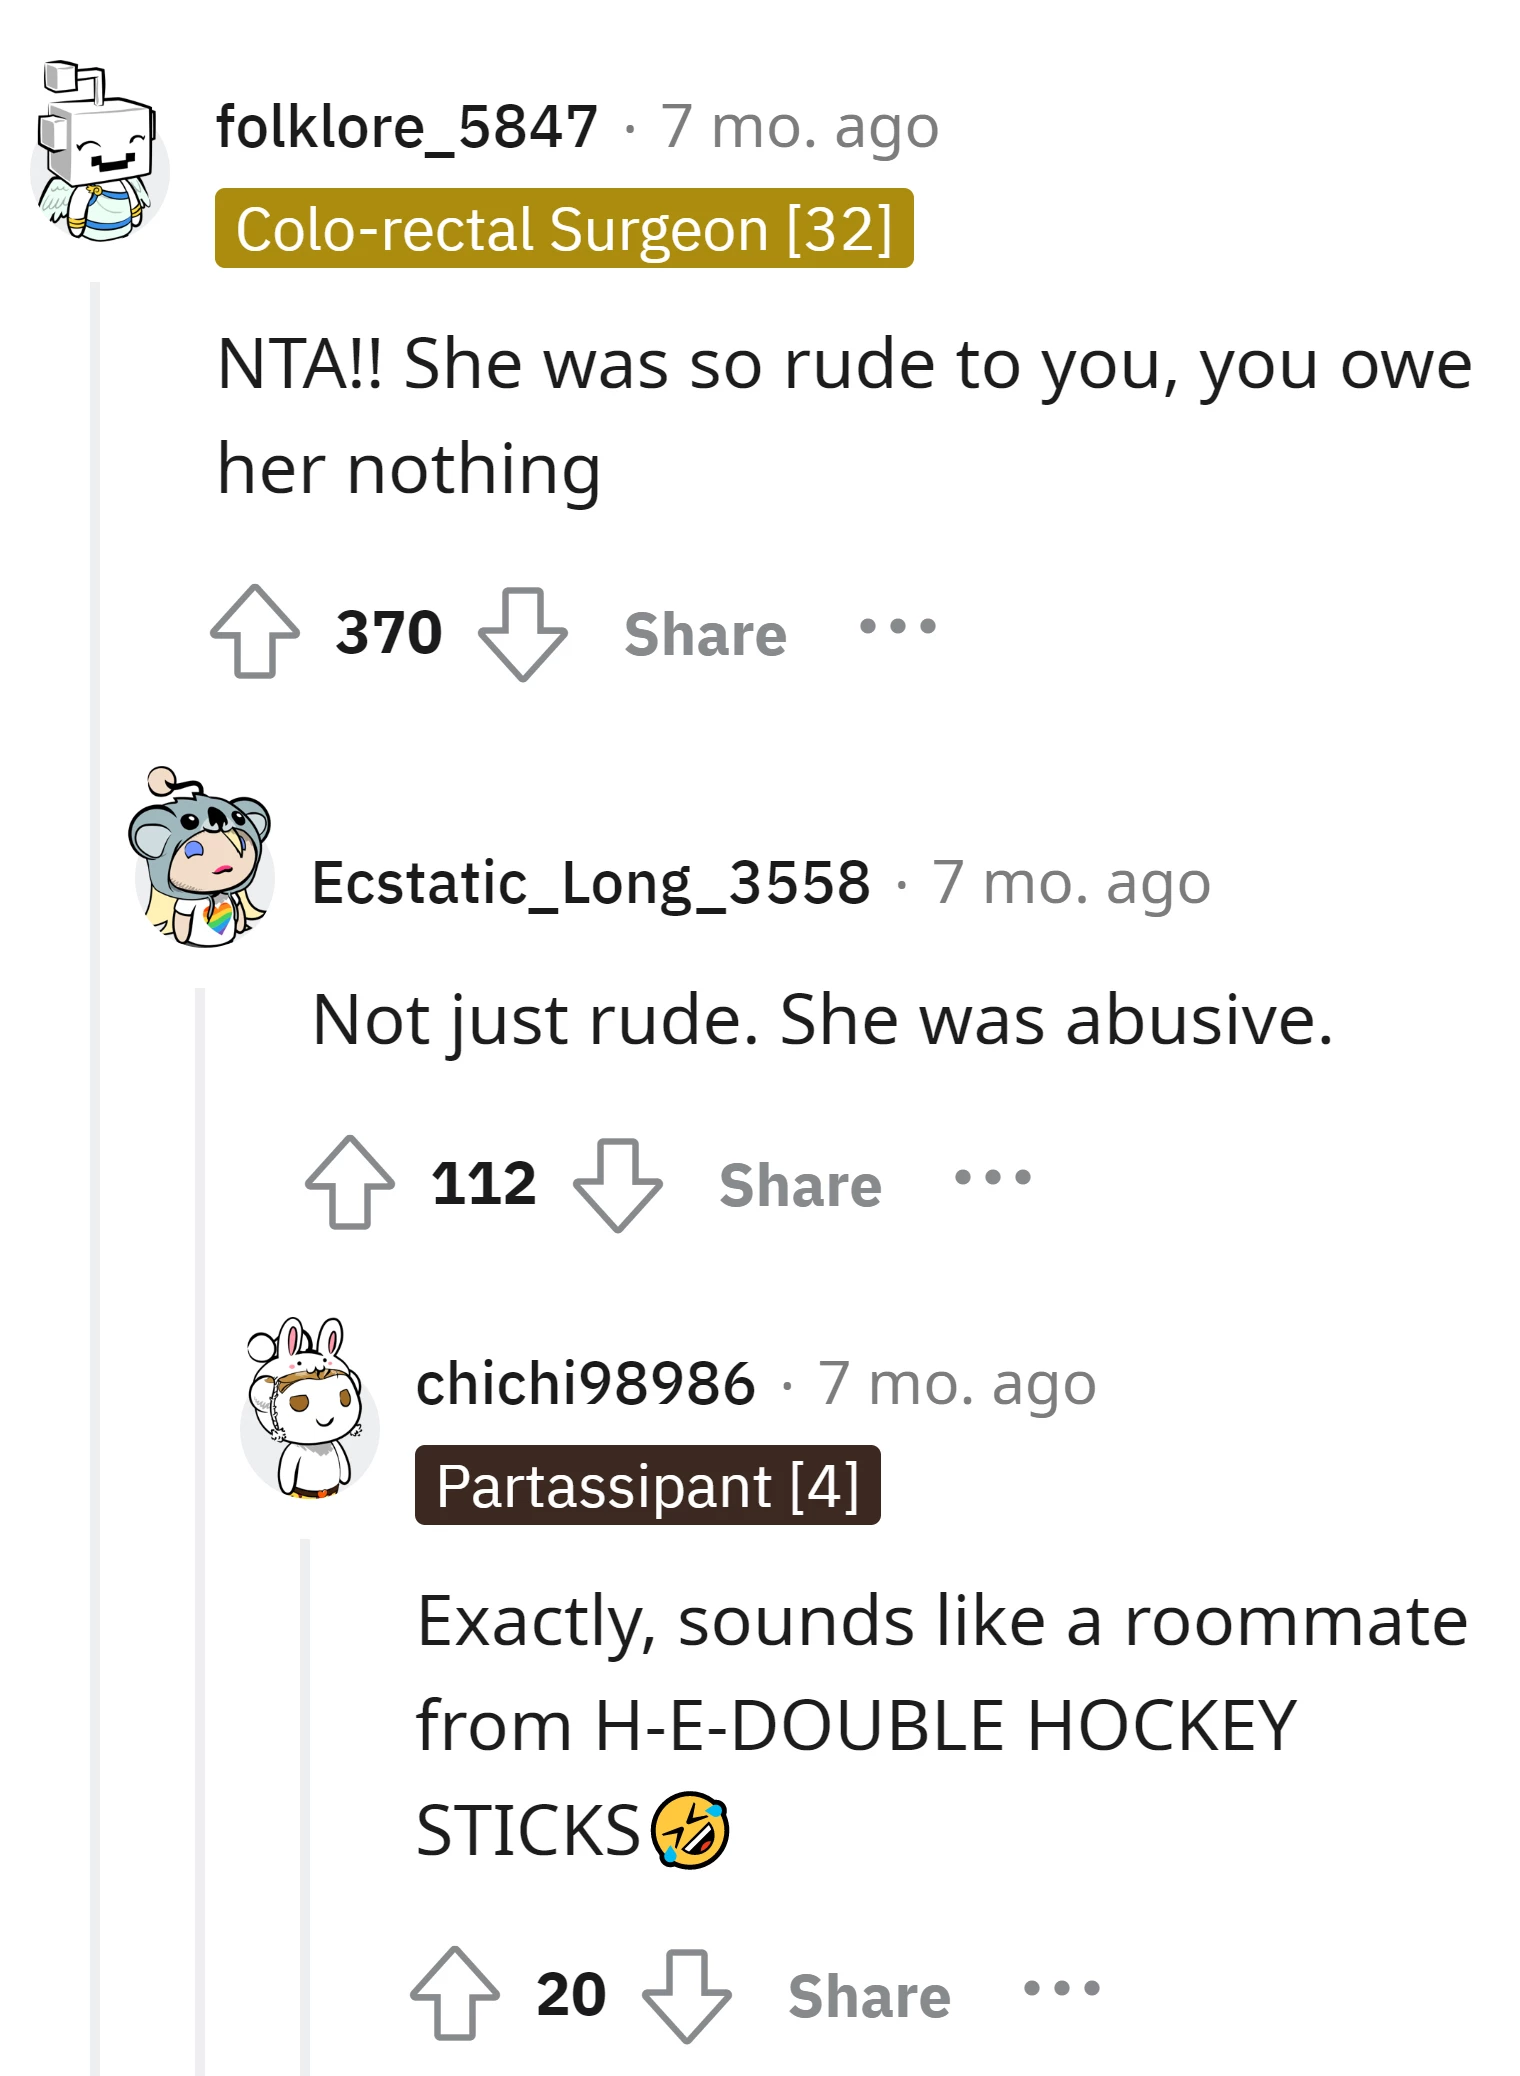 Commenter shares that he roommate's behavior was not just rude but abusive